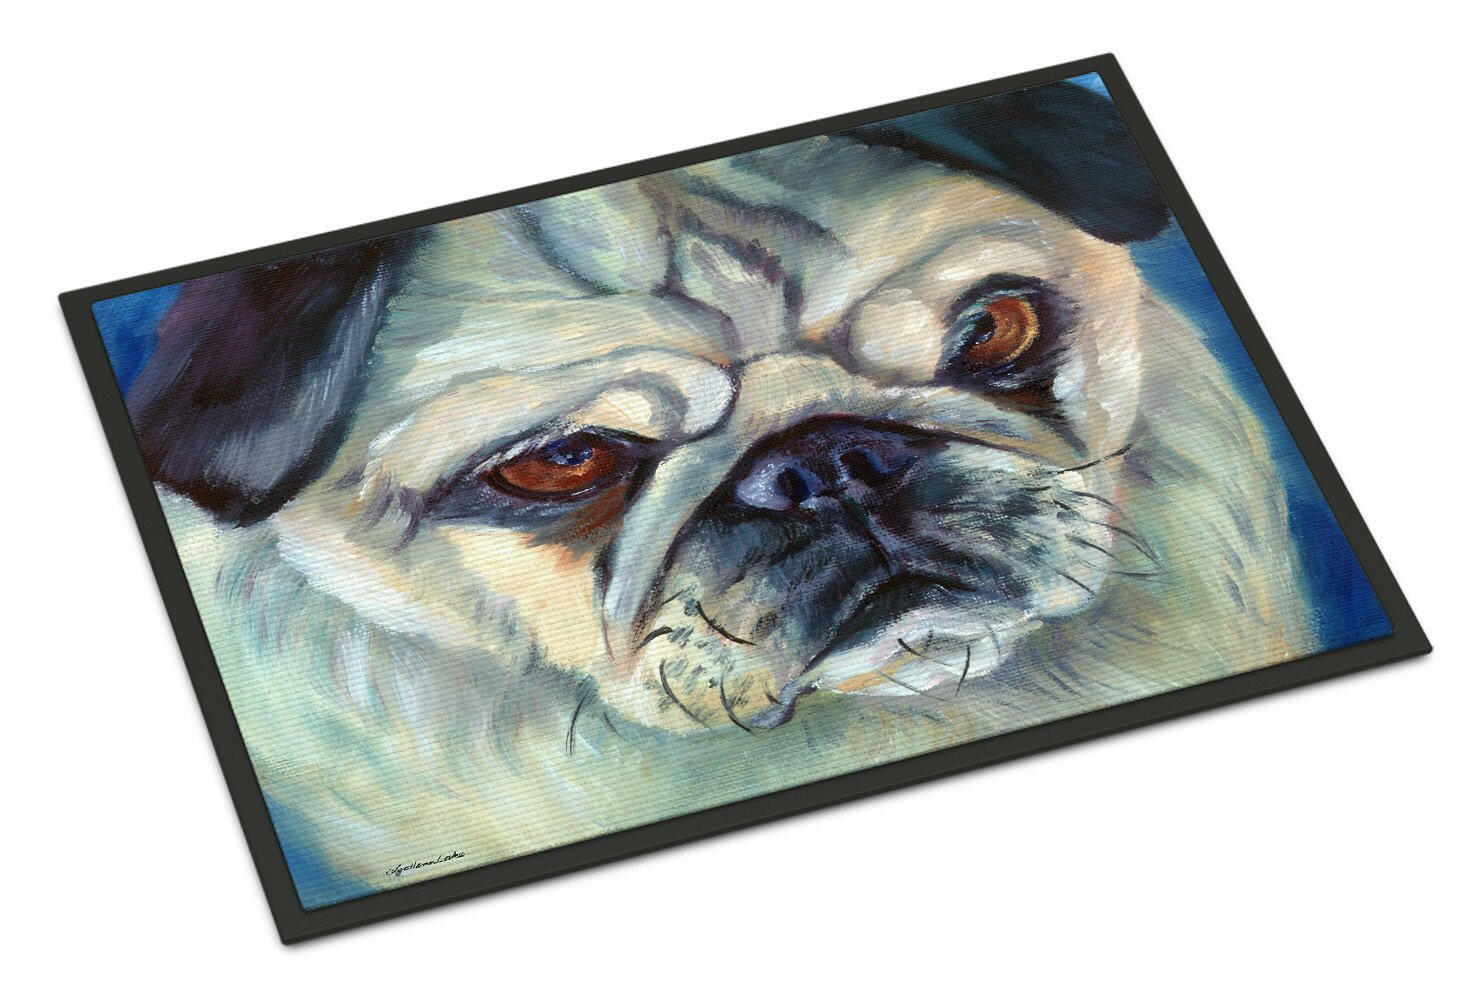 Pug in Thought Indoor or Outdoor Mat 24x36 7422JMAT - the-store.com